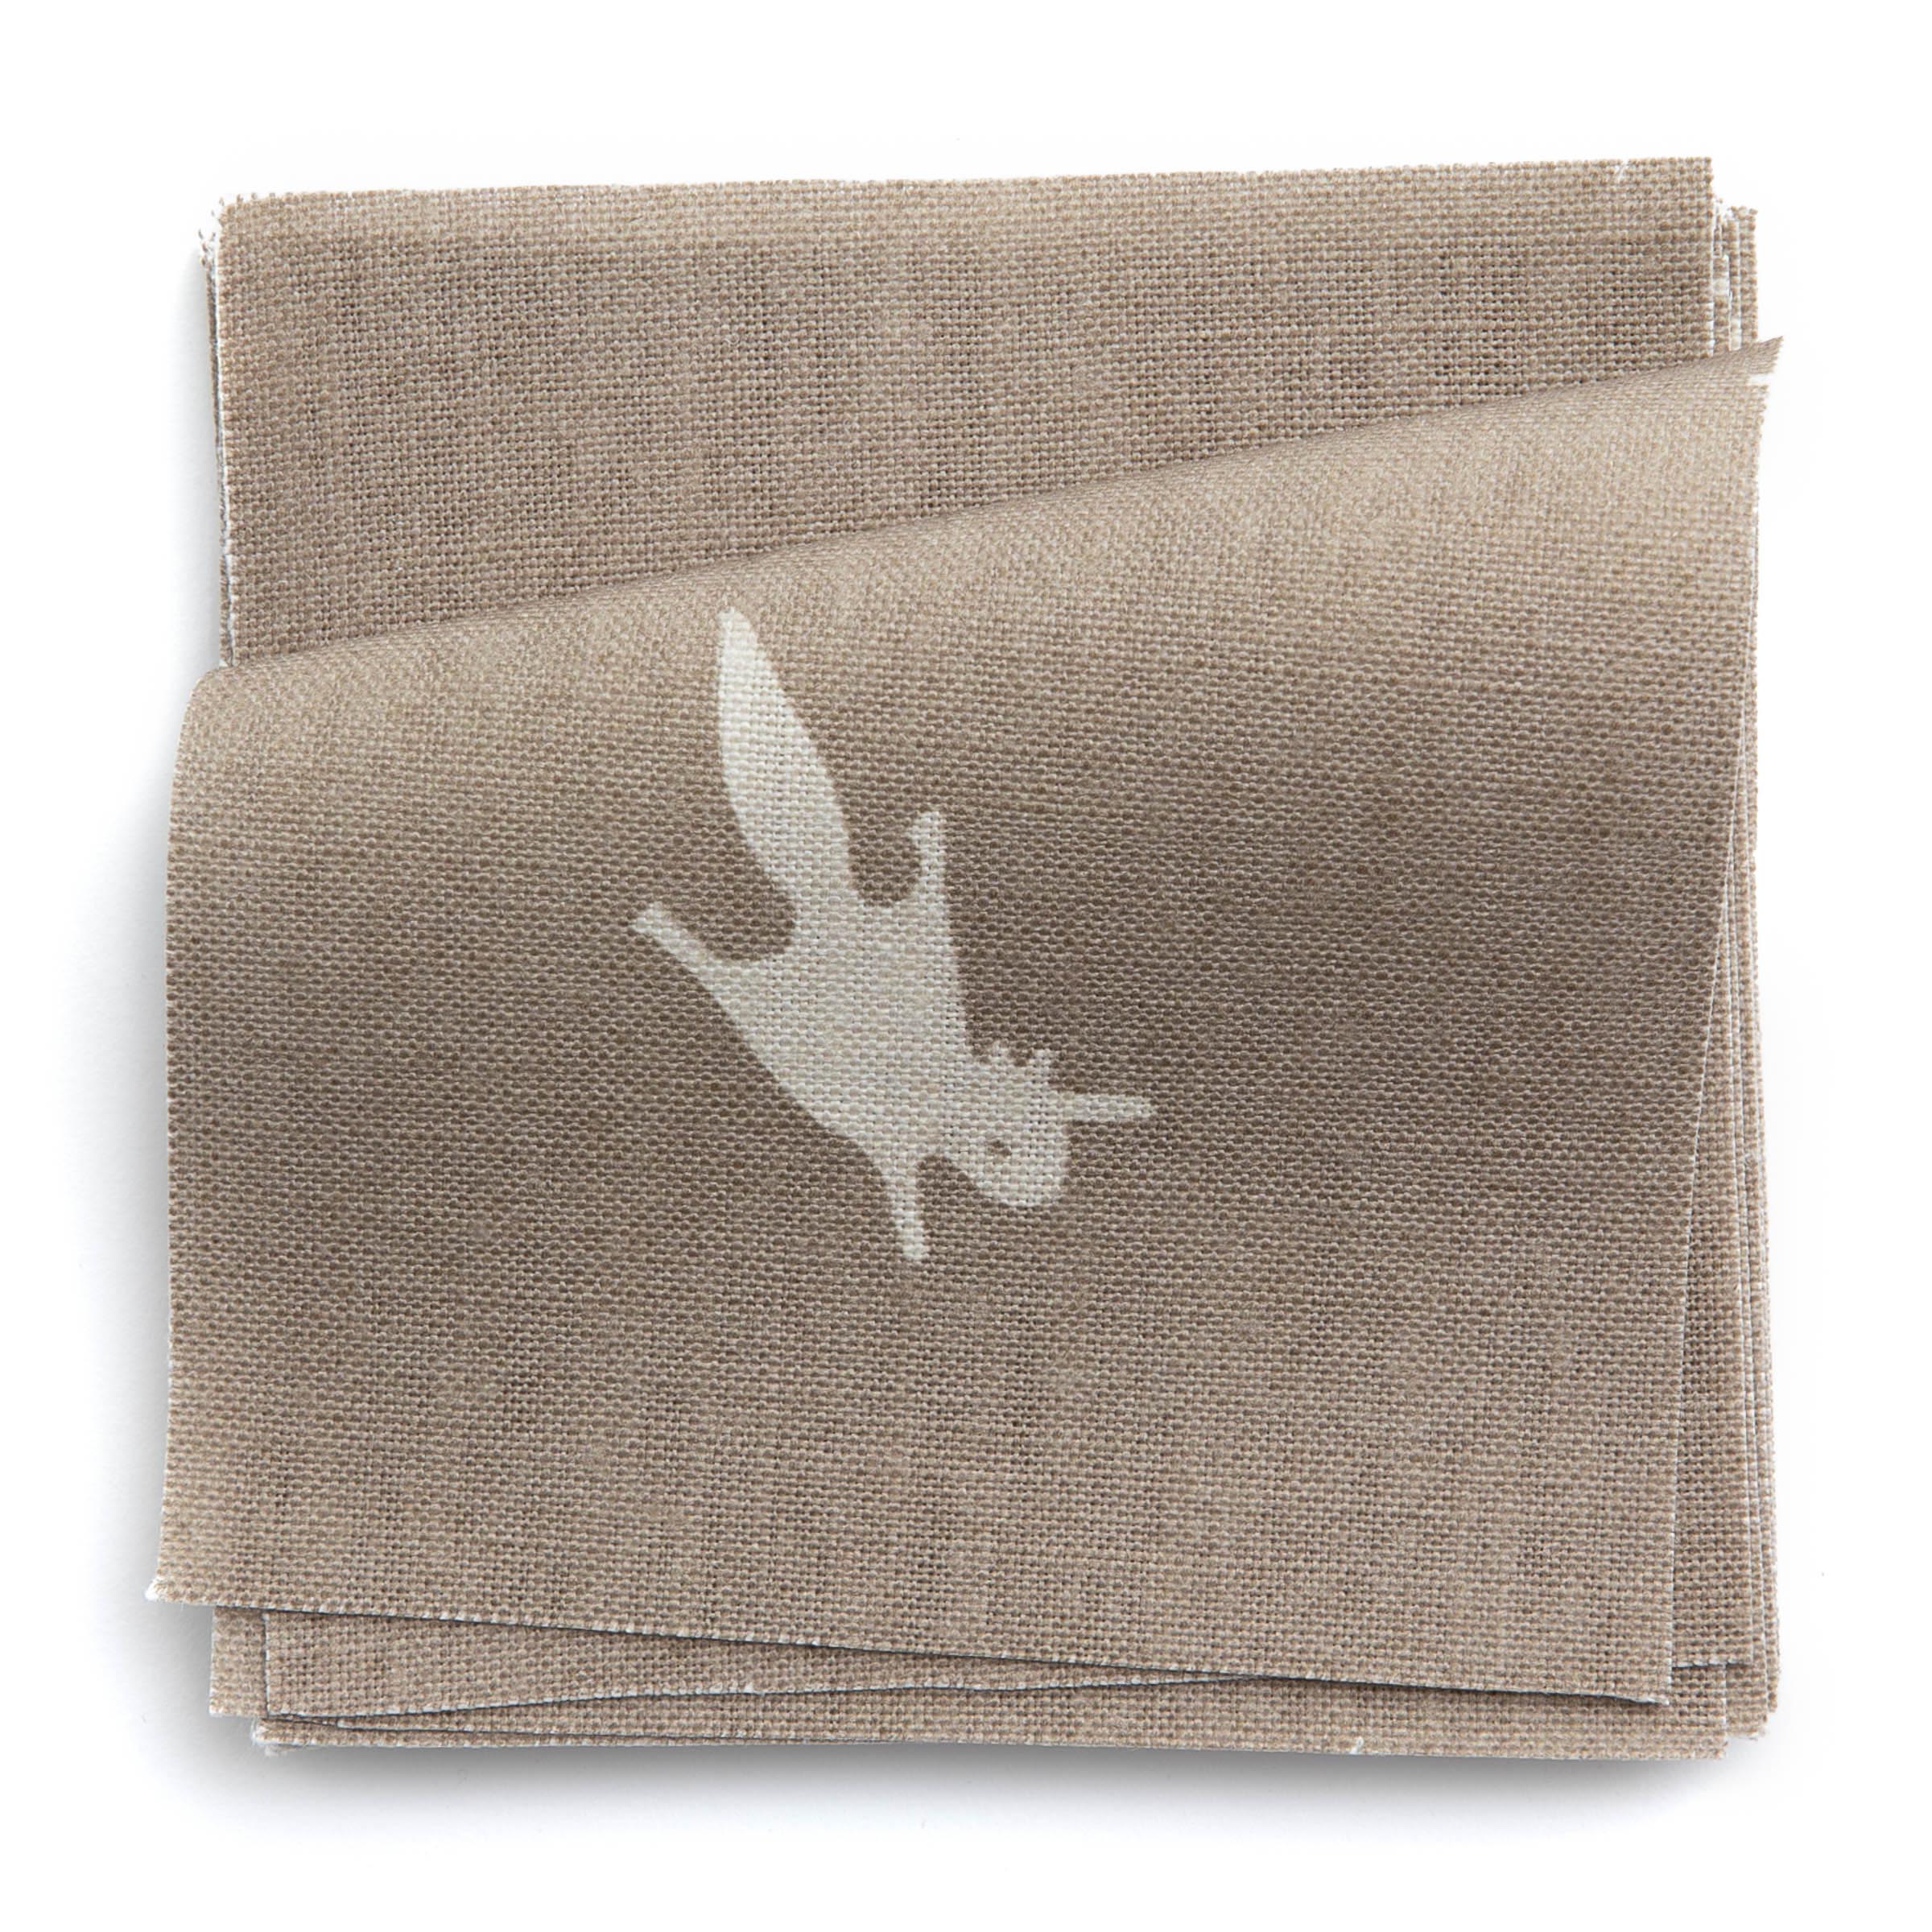 A stack of fabric swatches in a playful animal and branch print in cream on a brown field.